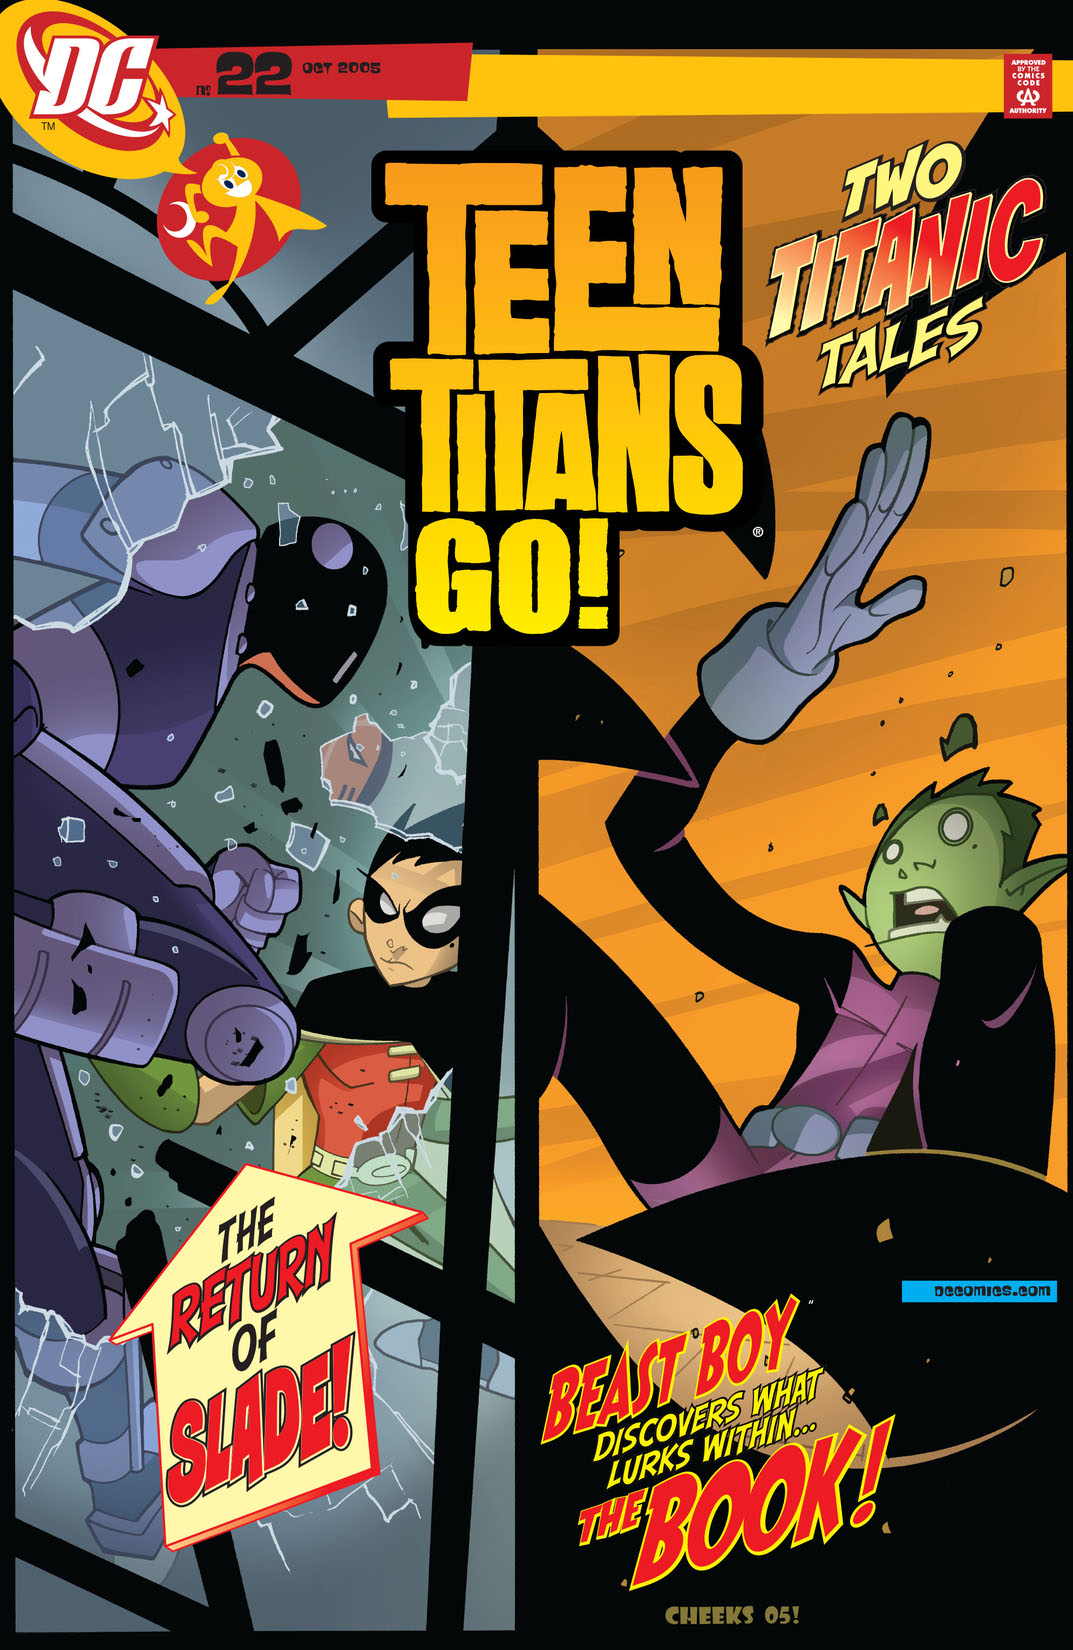 Teen Titans Go! (2003-) #22 preview images